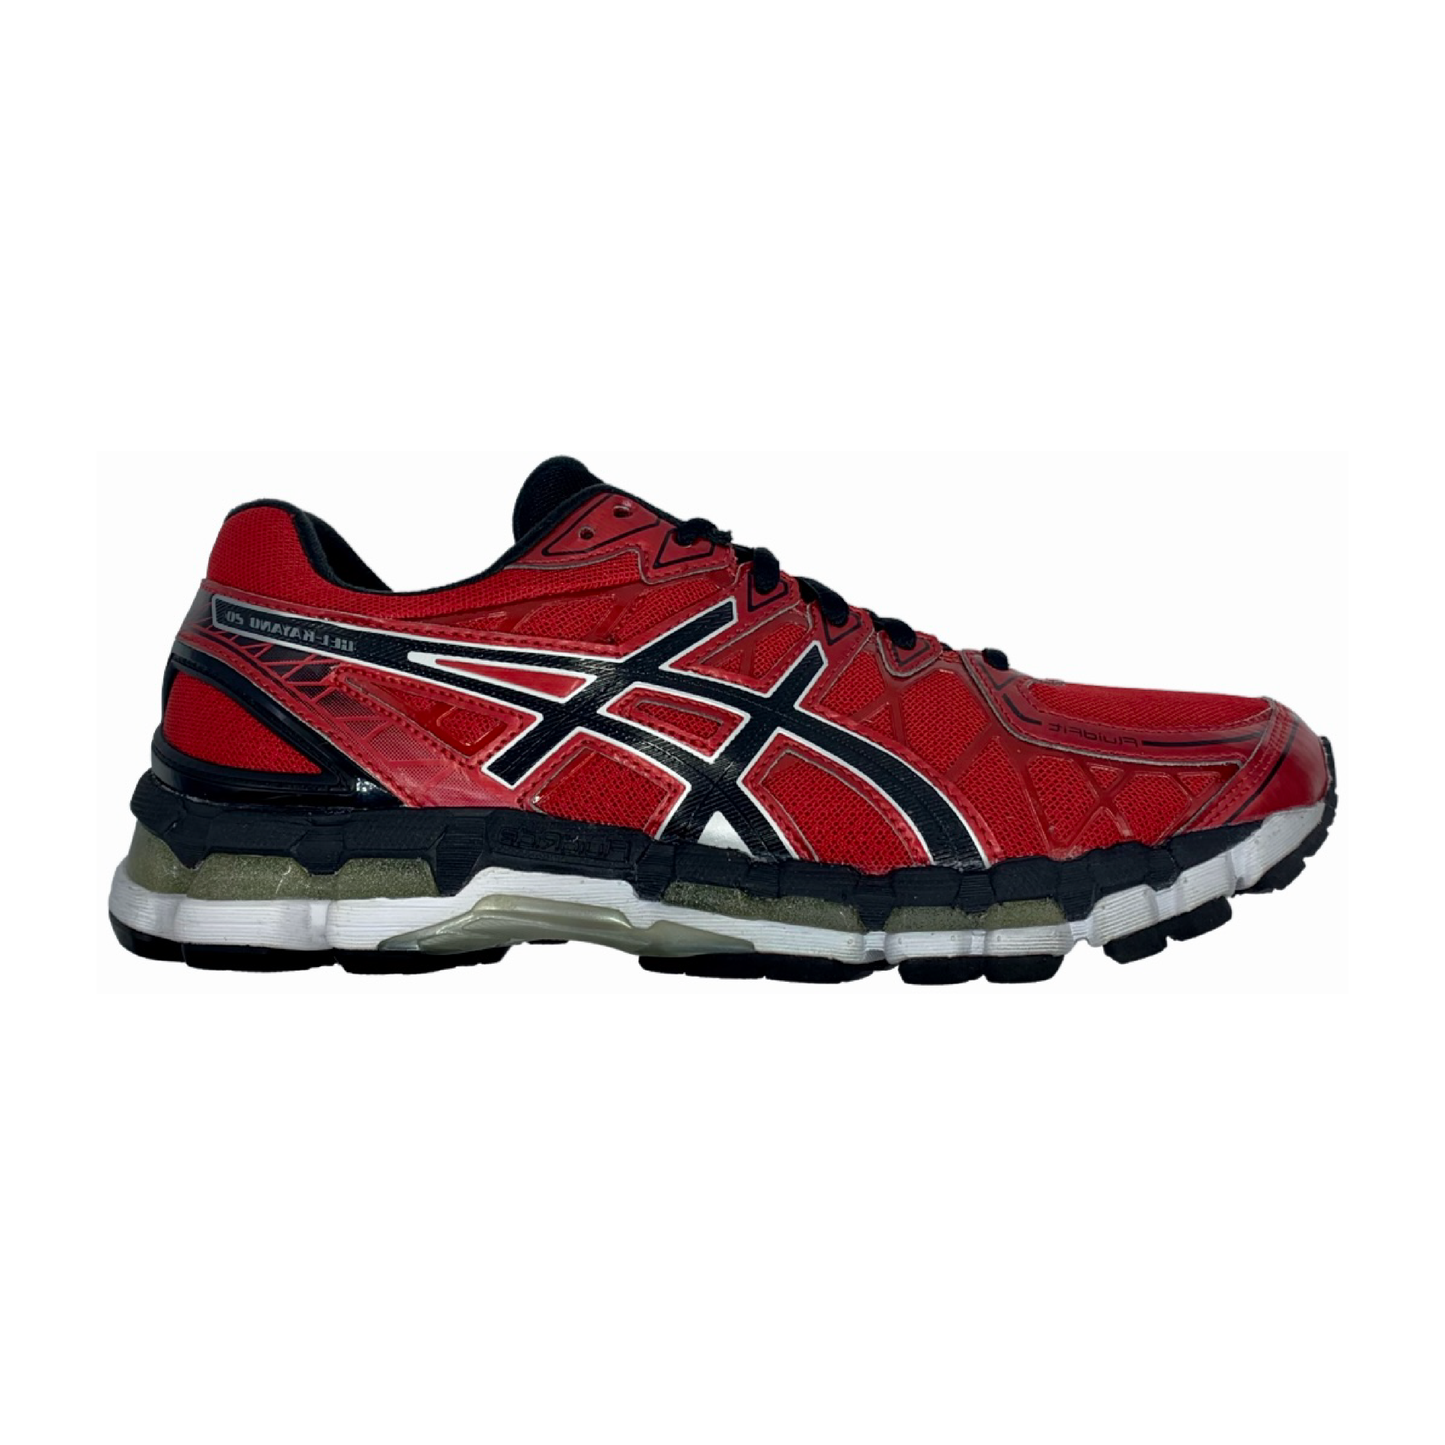 Gel-Kayano 20 ‘Rosso Red’